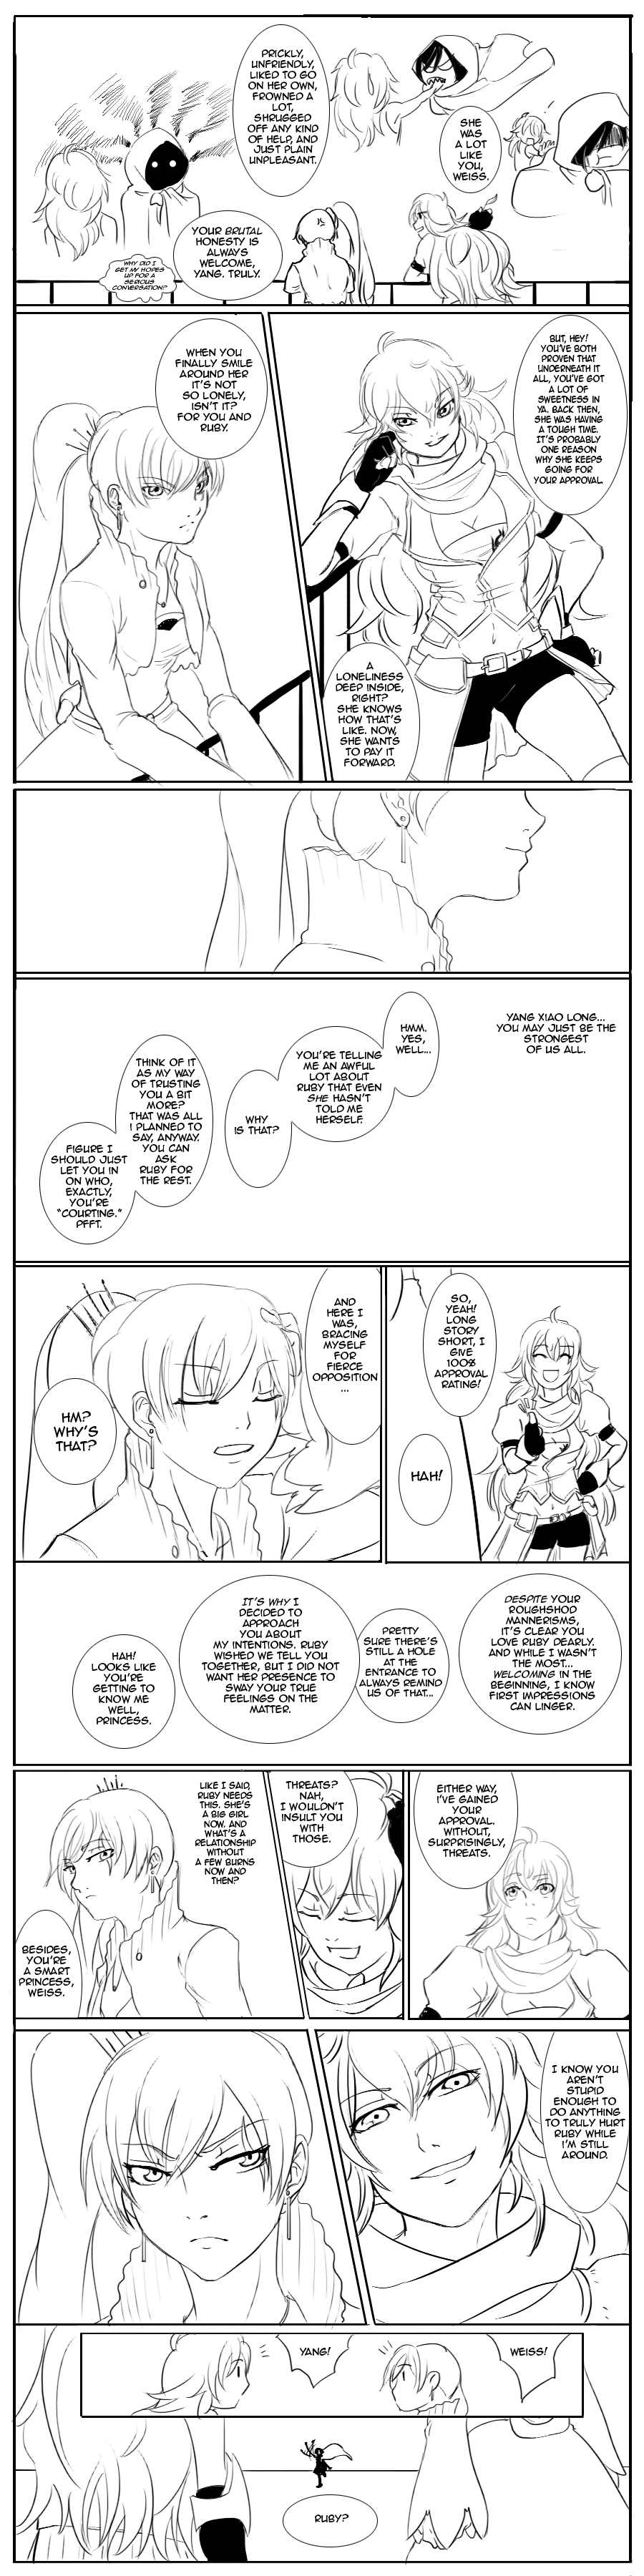 RWBY Comic: One of the Most Accurate Characterization of Yang I've Ever ...